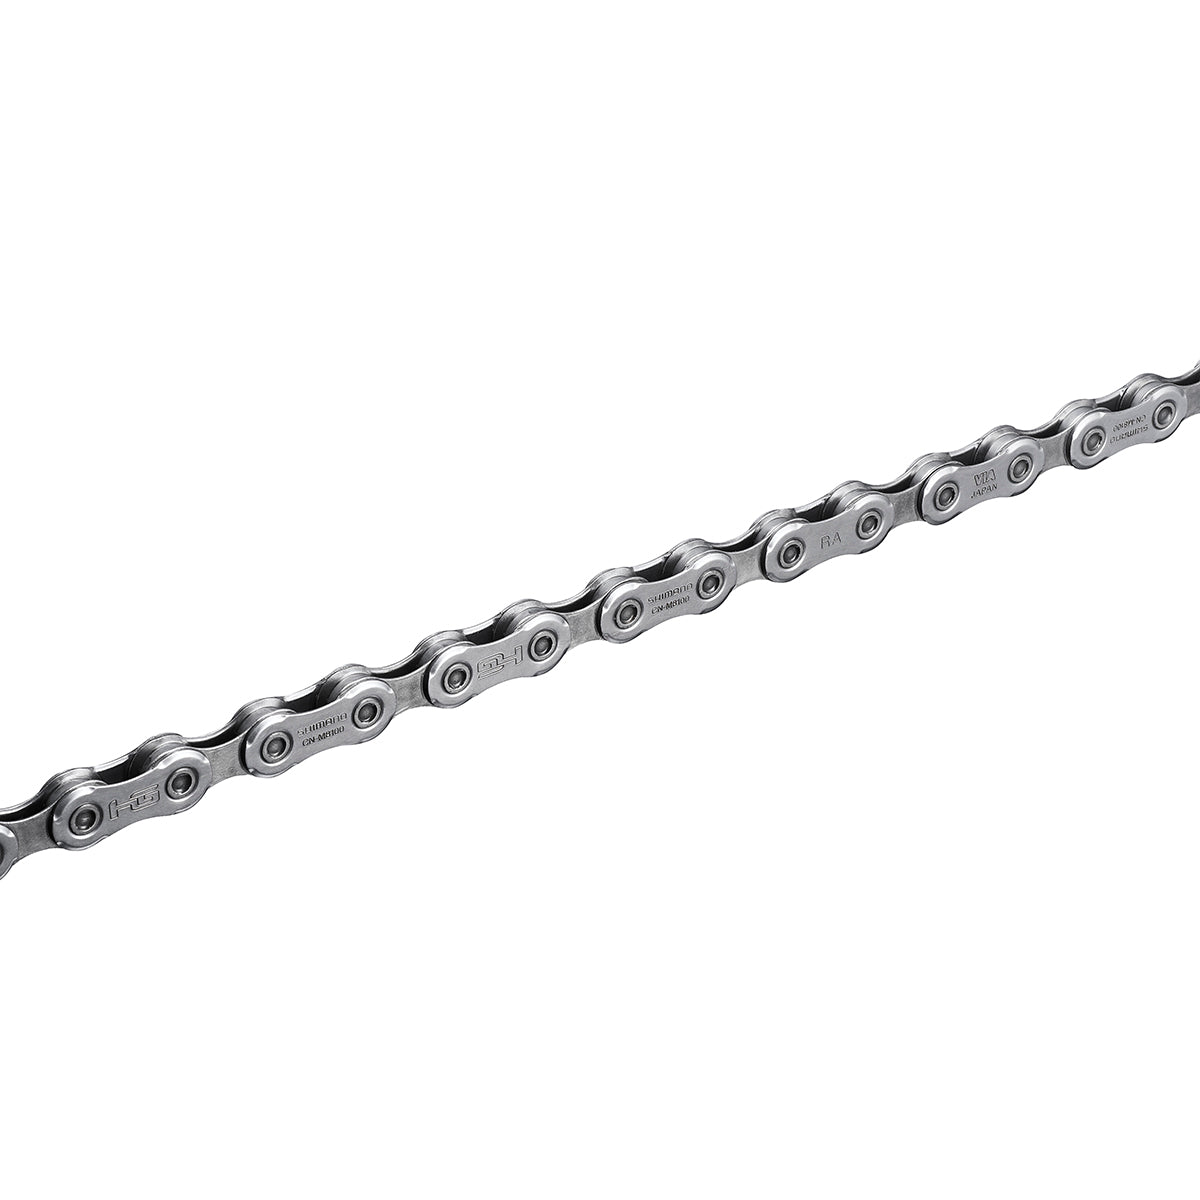 Shimano CN-M8100 12s chain + Quick-Link 